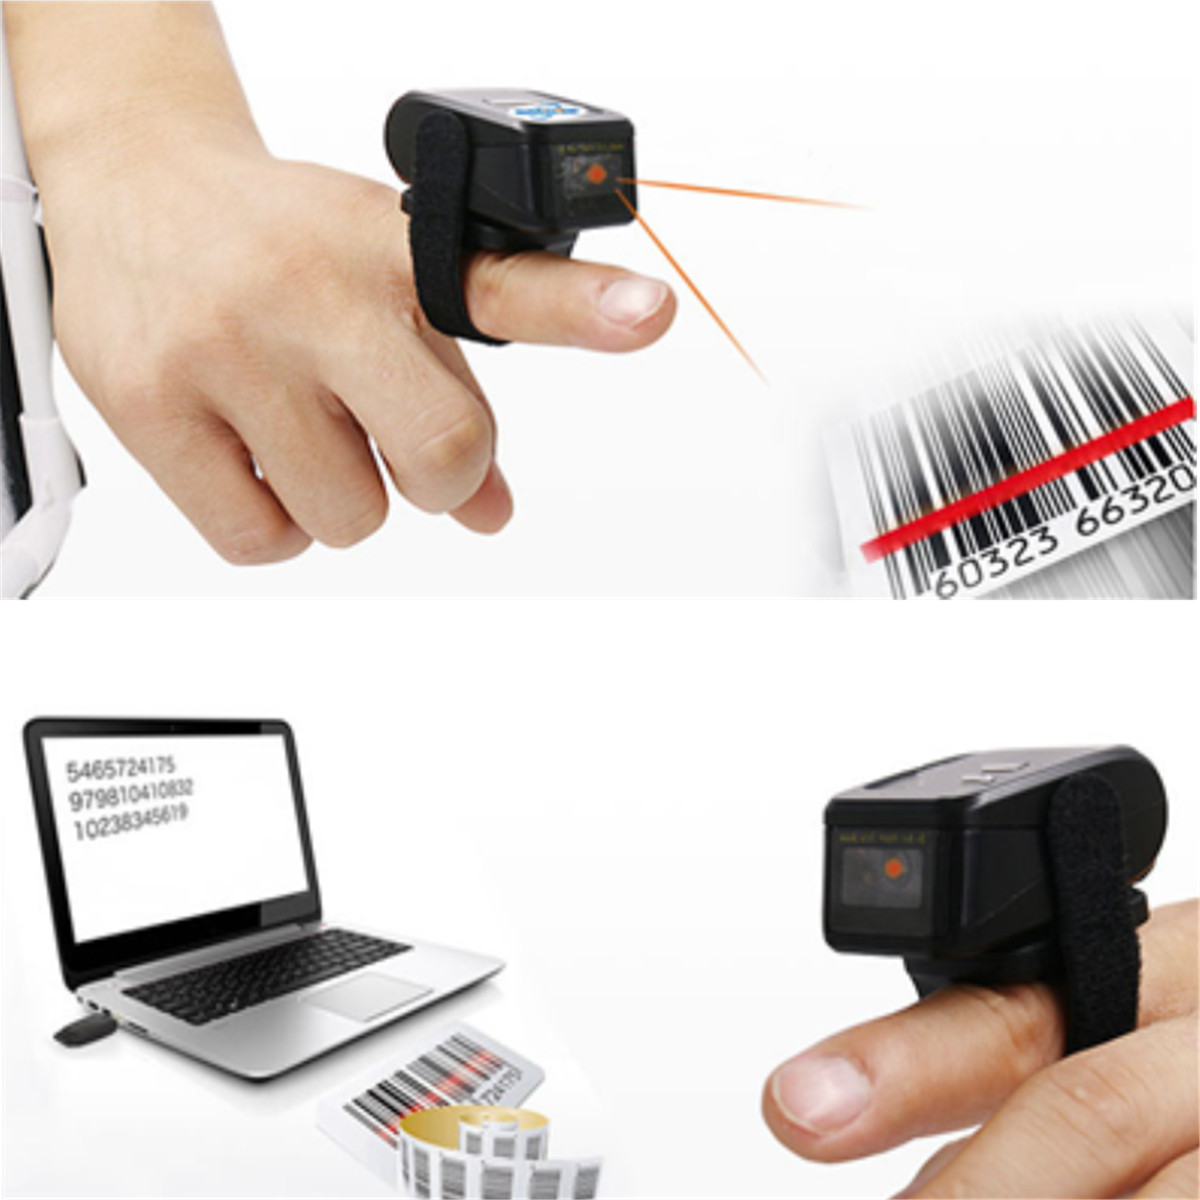 

Mini Portable Wearable Ring Wireless bluetooth 4.0 Barcode Scanner Reader 1D UPC